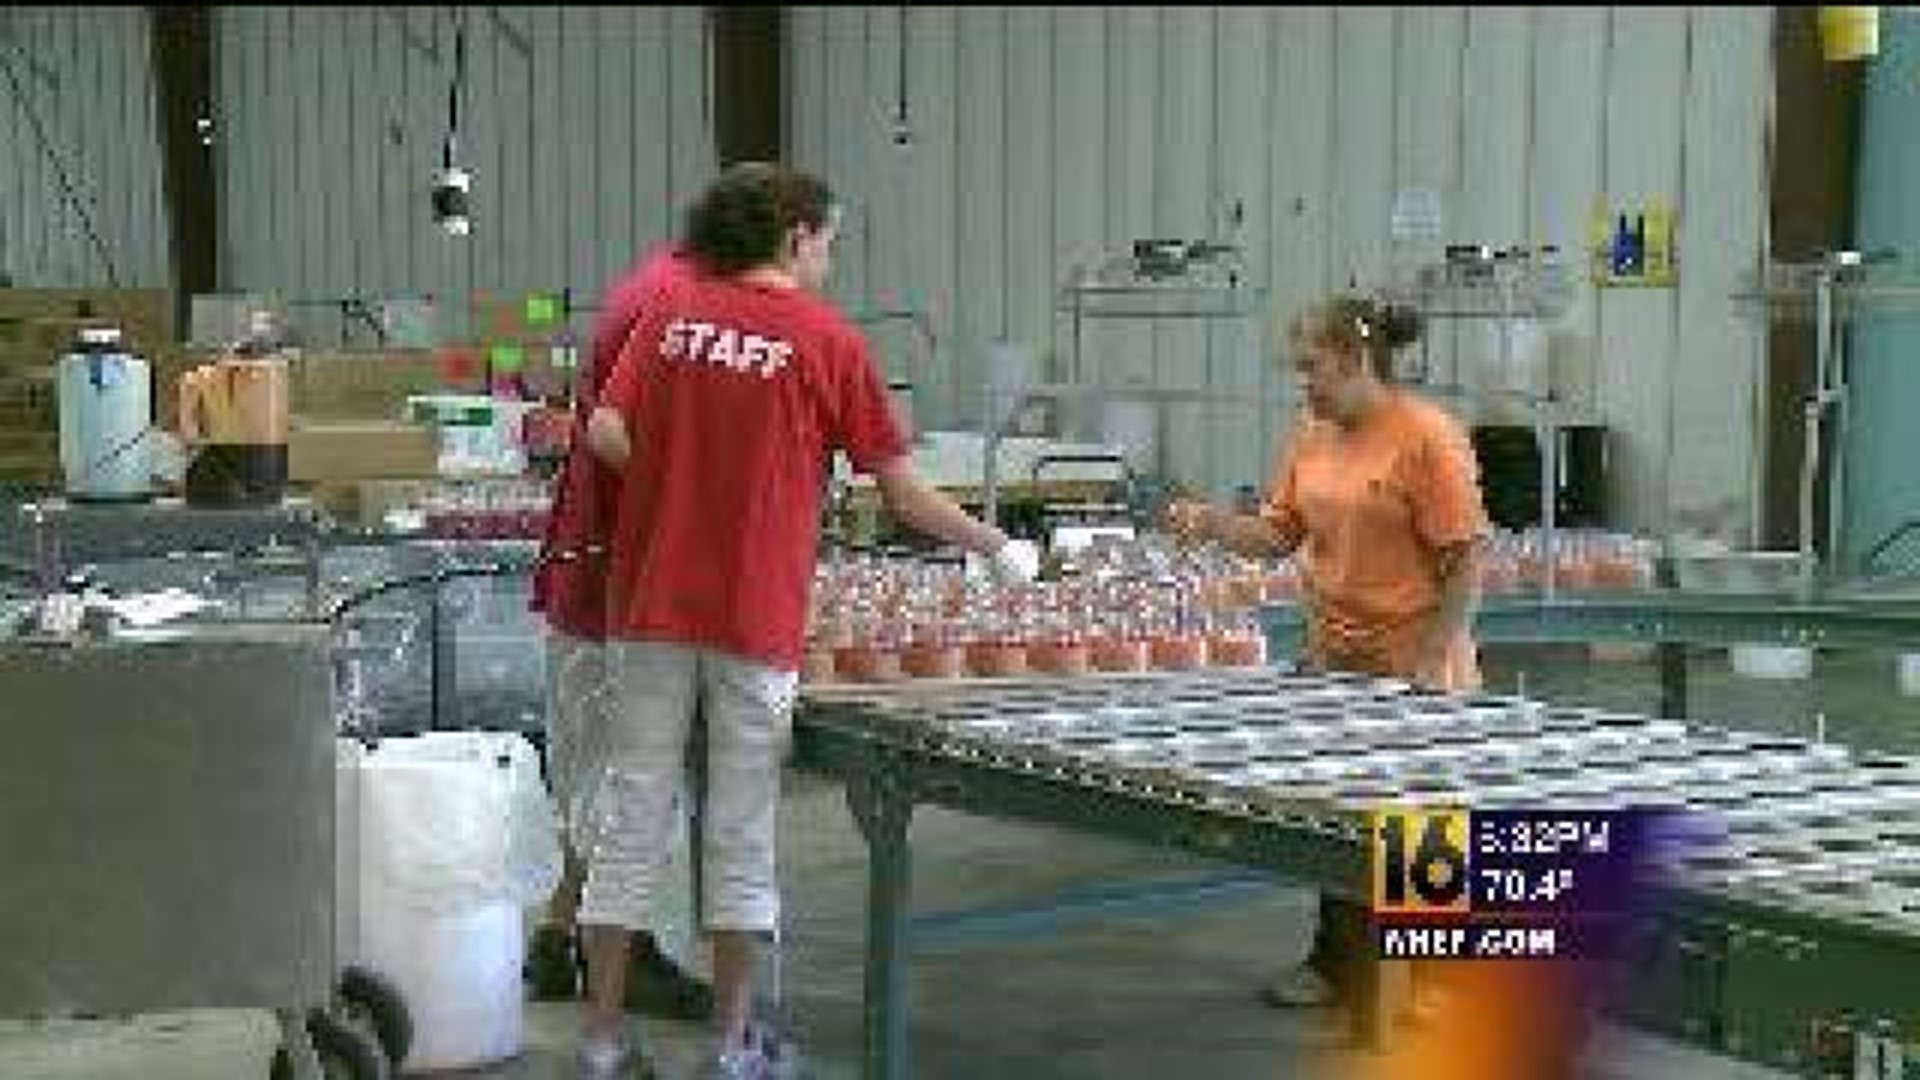 Wilkes-Barre Candle Company Wants to Export Overseas